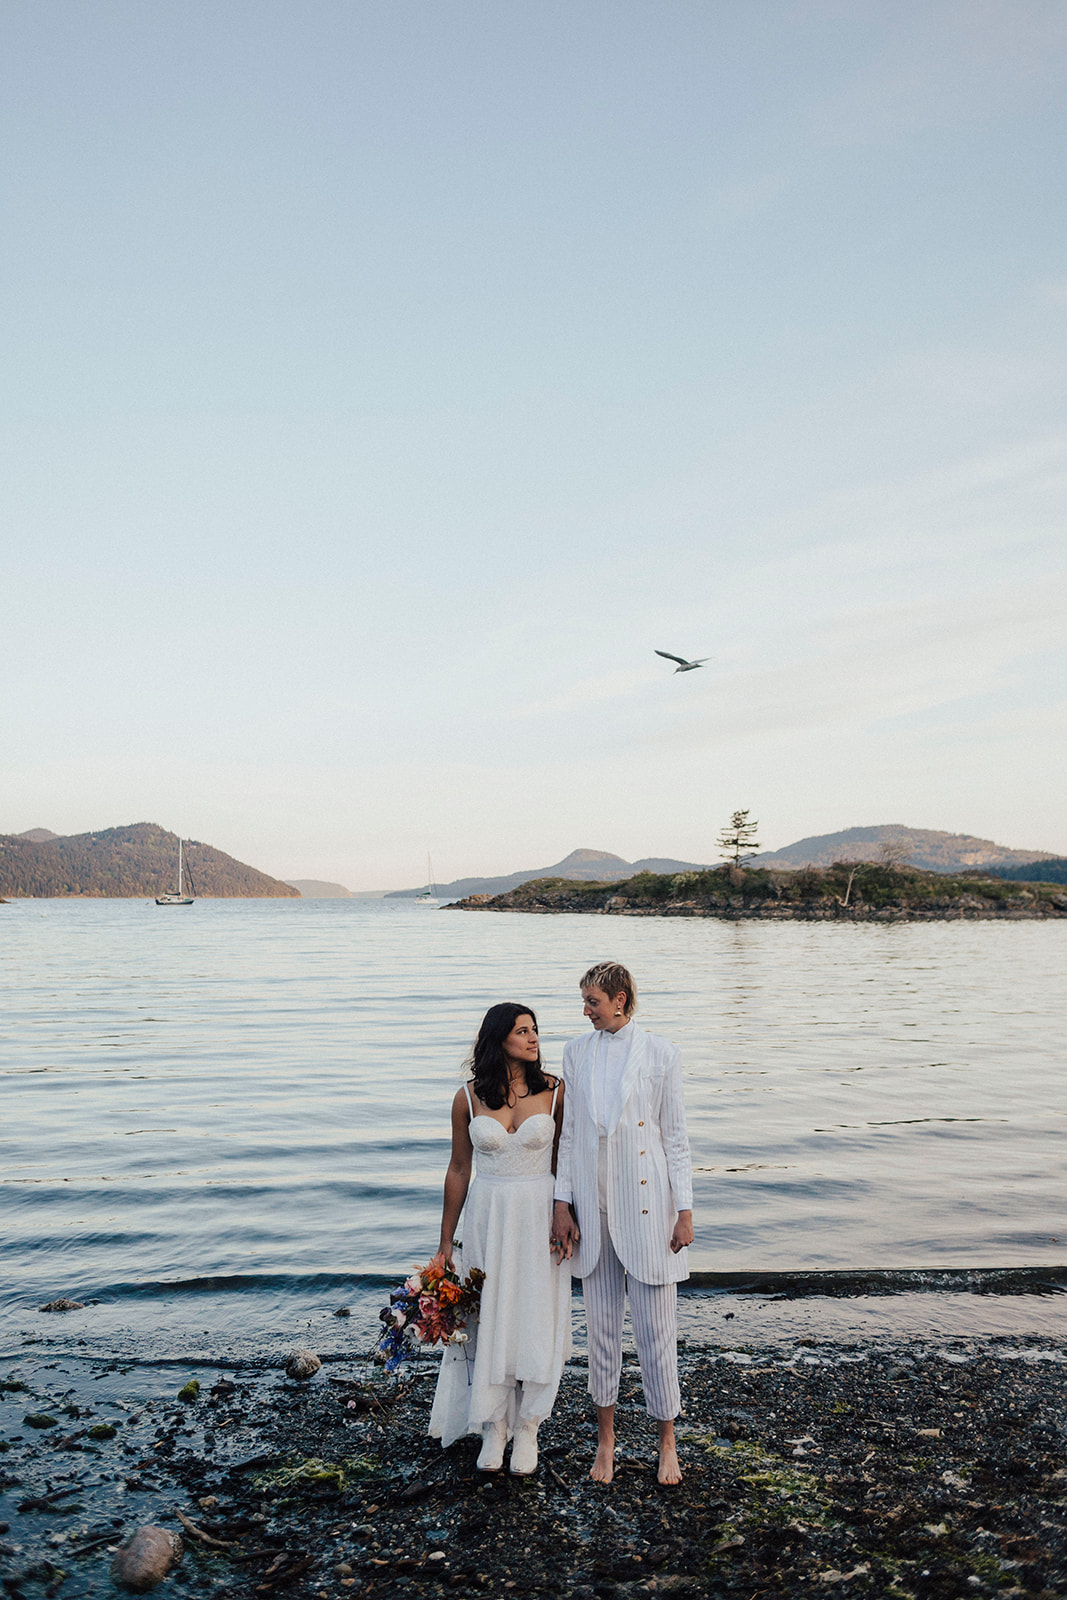 Intimate Elopement at Outlook Inn on Orcas Island. Eastsound Wedding in the San Juan Islands. Vintage styling